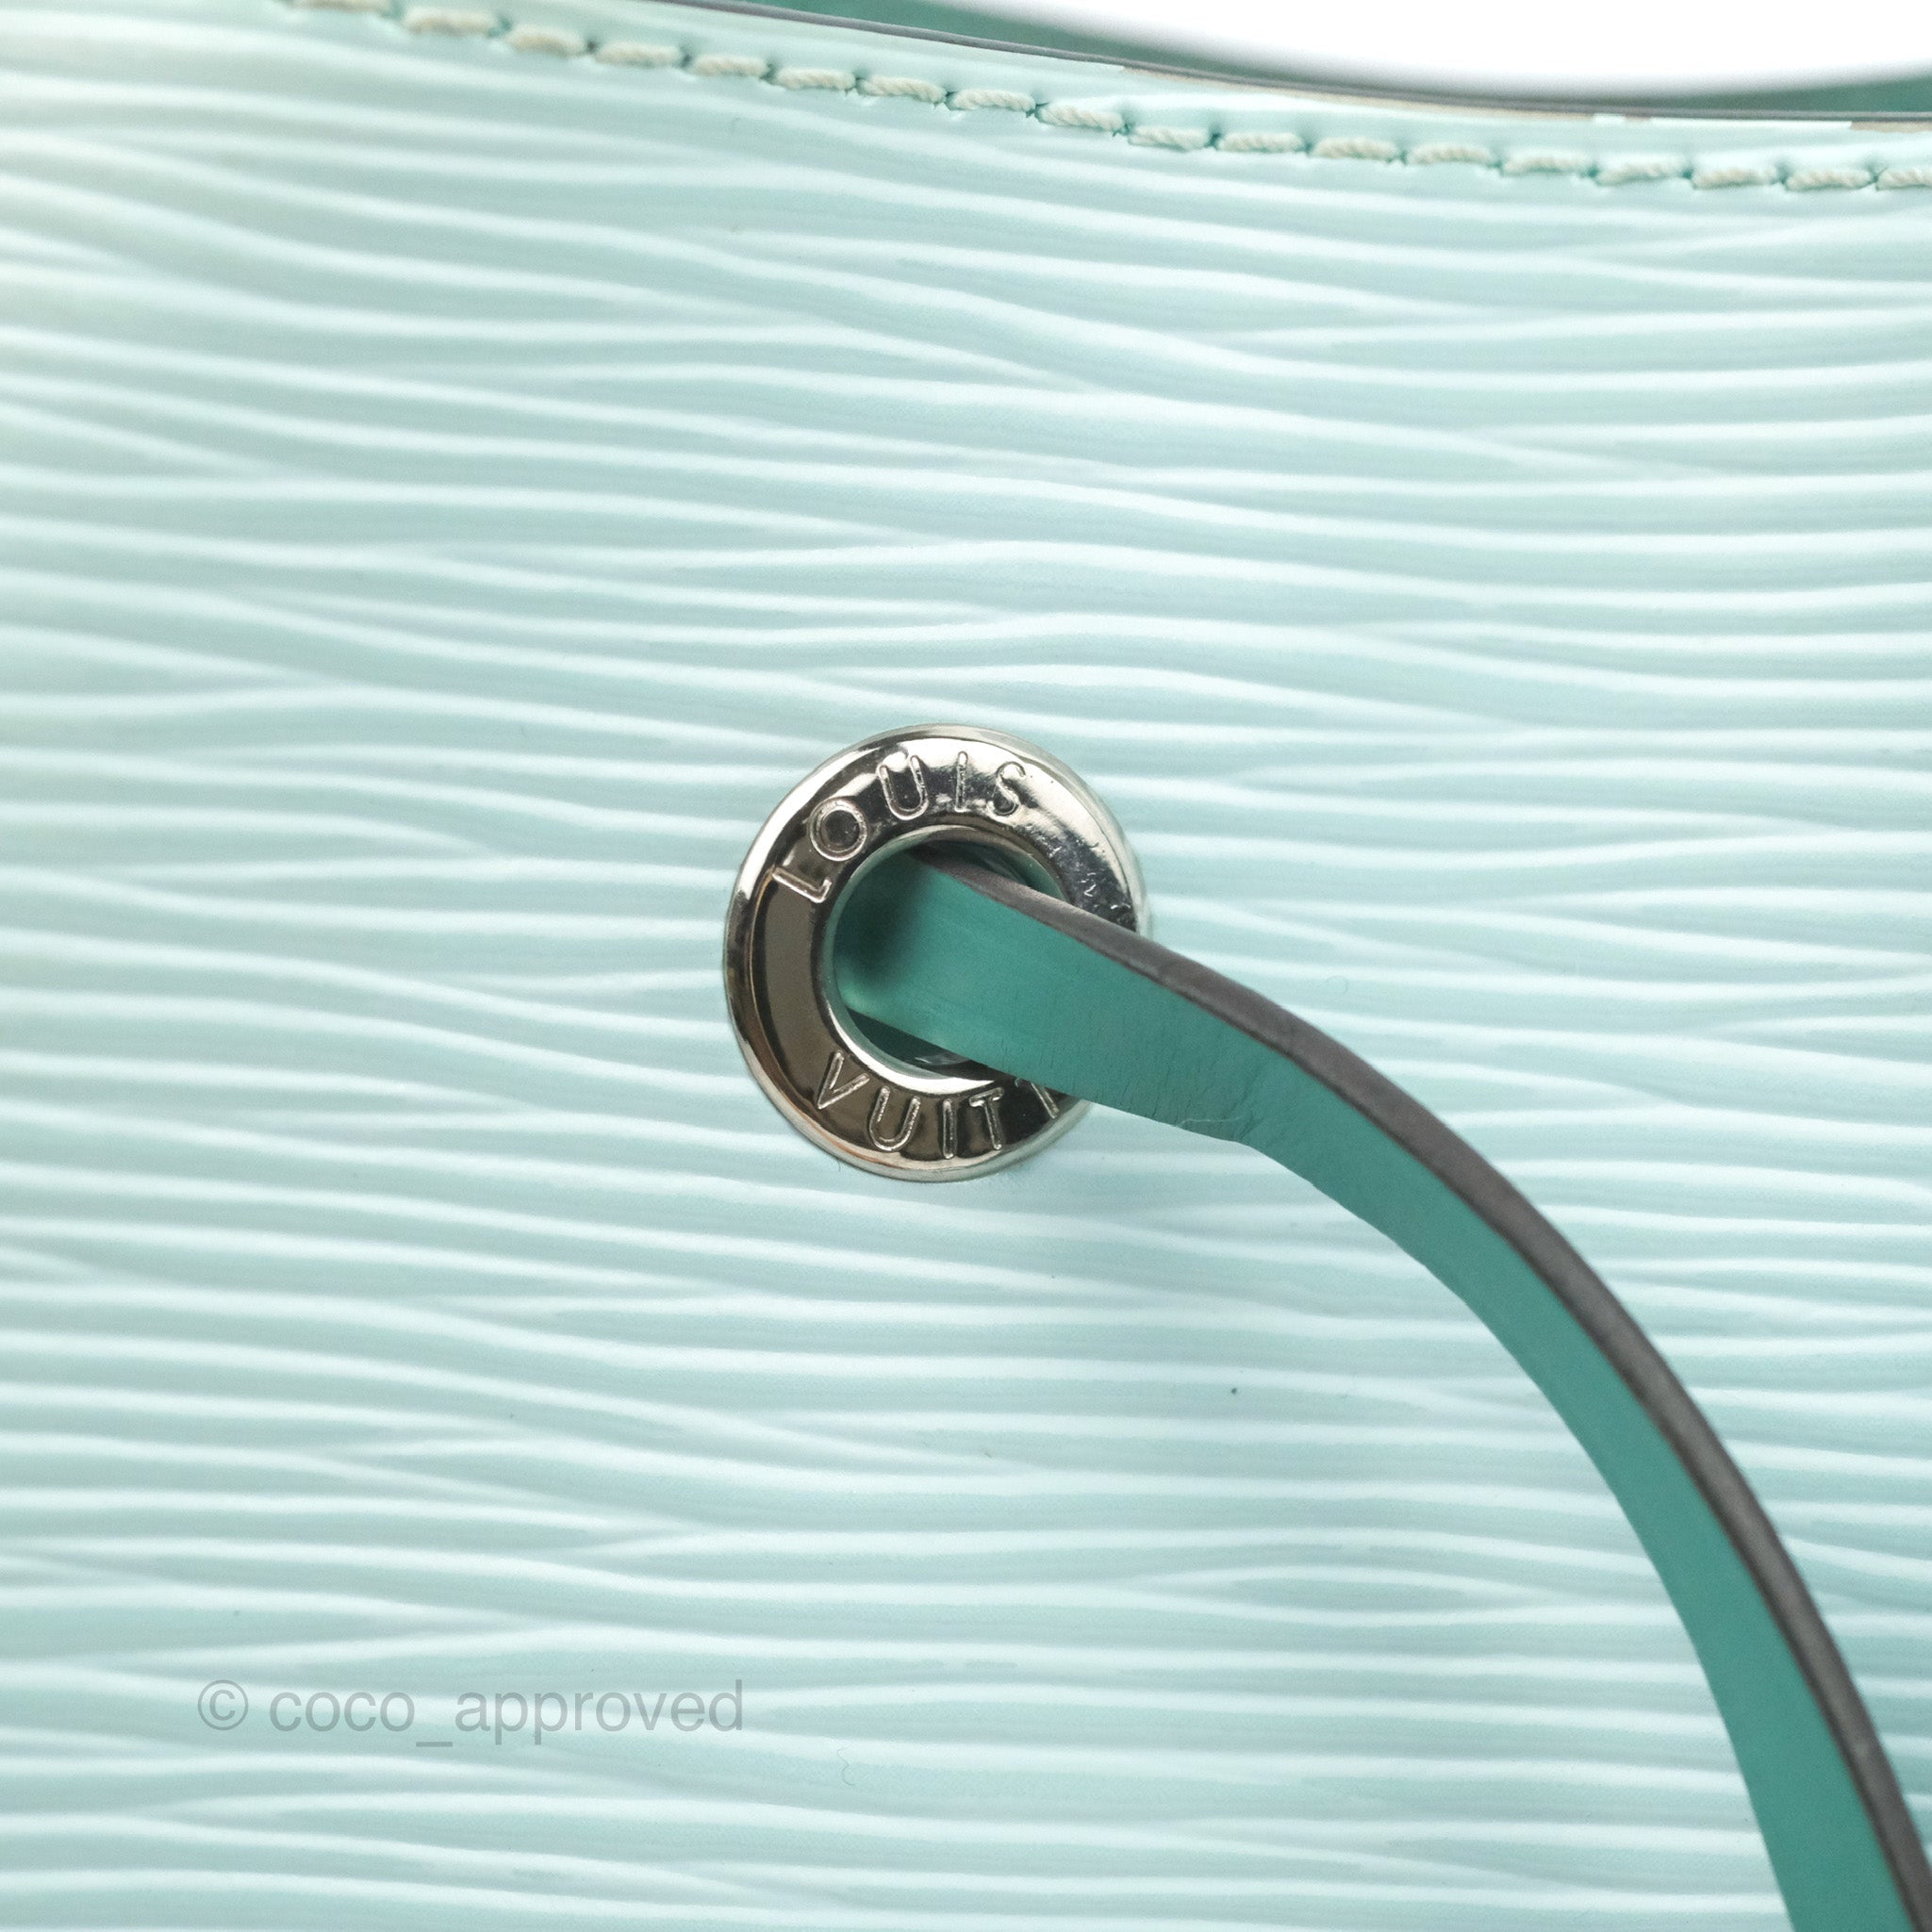 At Auction: Louis Vuitton Turquoise Epi Leather Neverfull MM